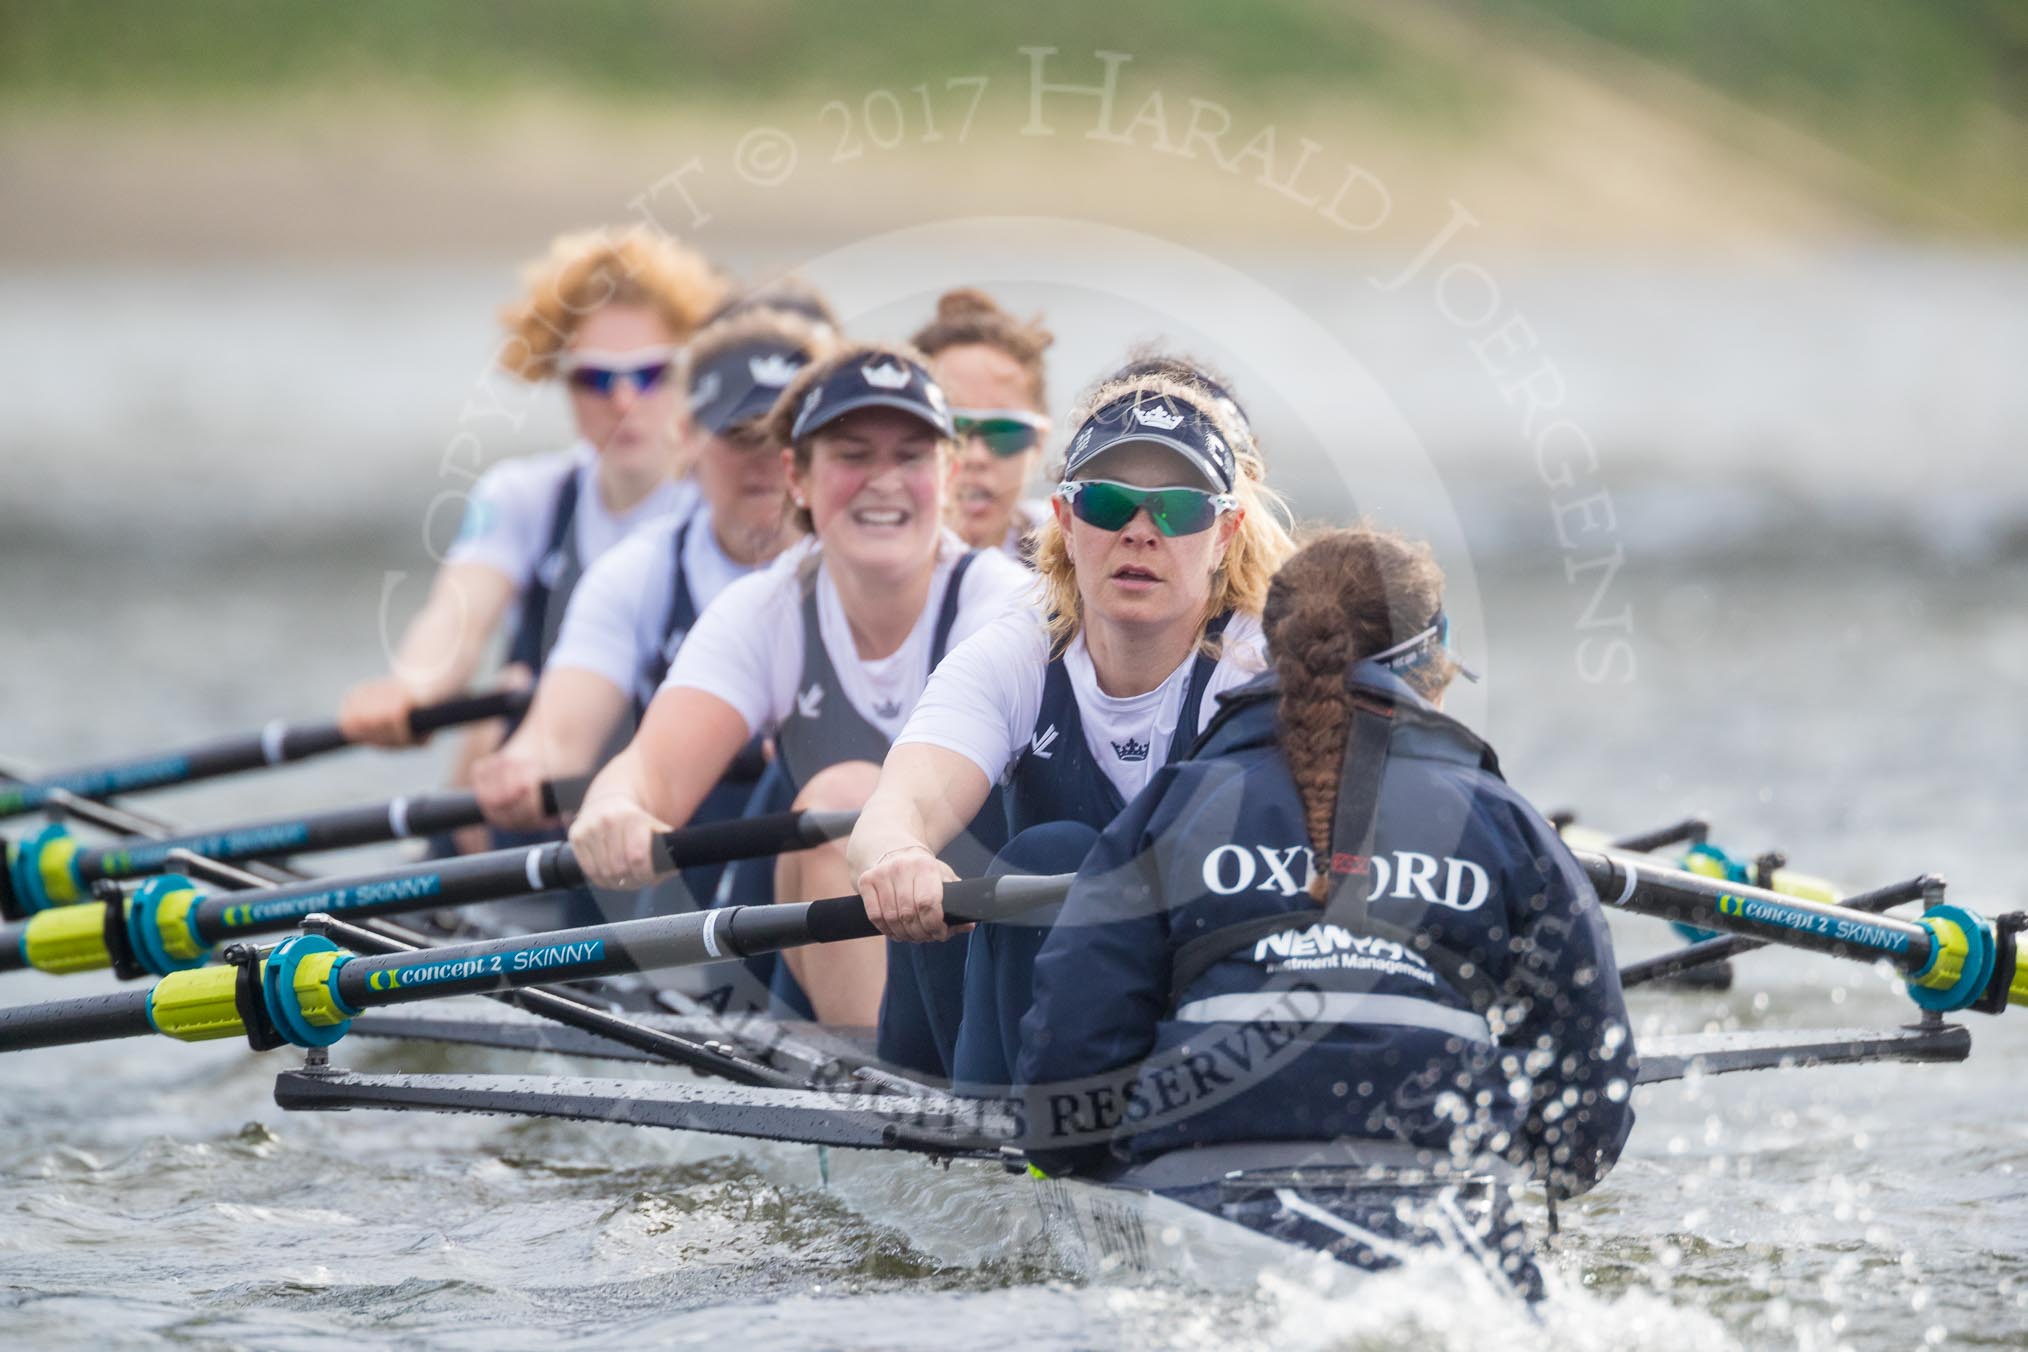 The Cancer Research UK Boat Race season 2017 - Women's Boat Race Fixture OUWBC vs Molesey BC: OUWBC during the second part of the fixture - bow Alice Roberts, 2 Beth Bridgman, 3 Rebecca Te Water Naude, 4 Rebecca Esselstein, 5 Chloe Laverack, 6 Harriet Austin, 7 Jenna Hebert, stroke Emily Cameron, cox Eleanor Shearer.
River Thames between Putney Bridge and Mortlake,
London SW15,

United Kingdom,
on 19 March 2017 at 16:22, image #137